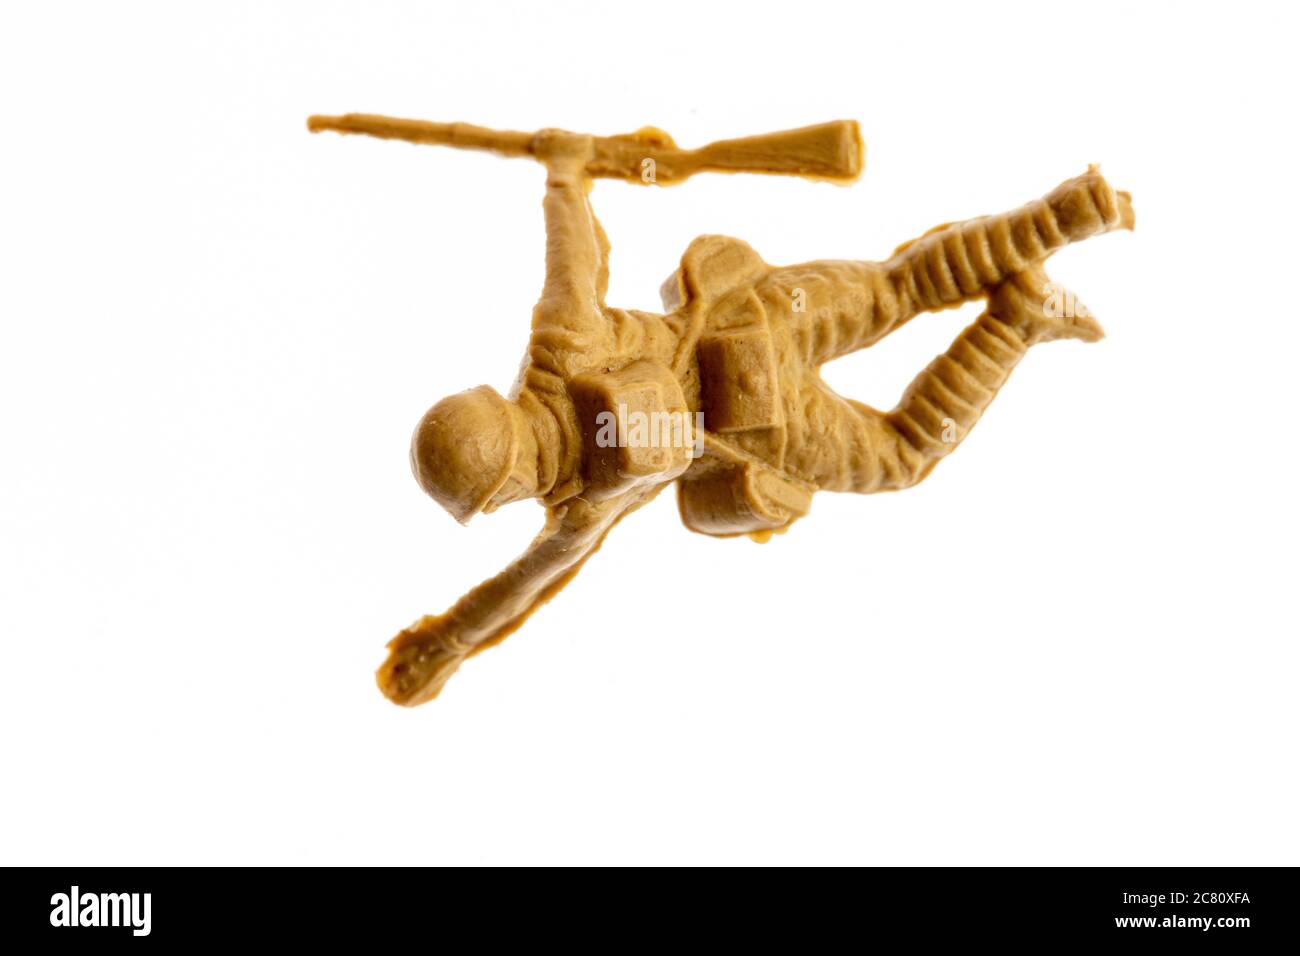 Airfix HO/00 scale model Japanese soldier figure from the 1960's against plain background. Close up of advancing WW2 soldier crawling with rifle. Stock Photo